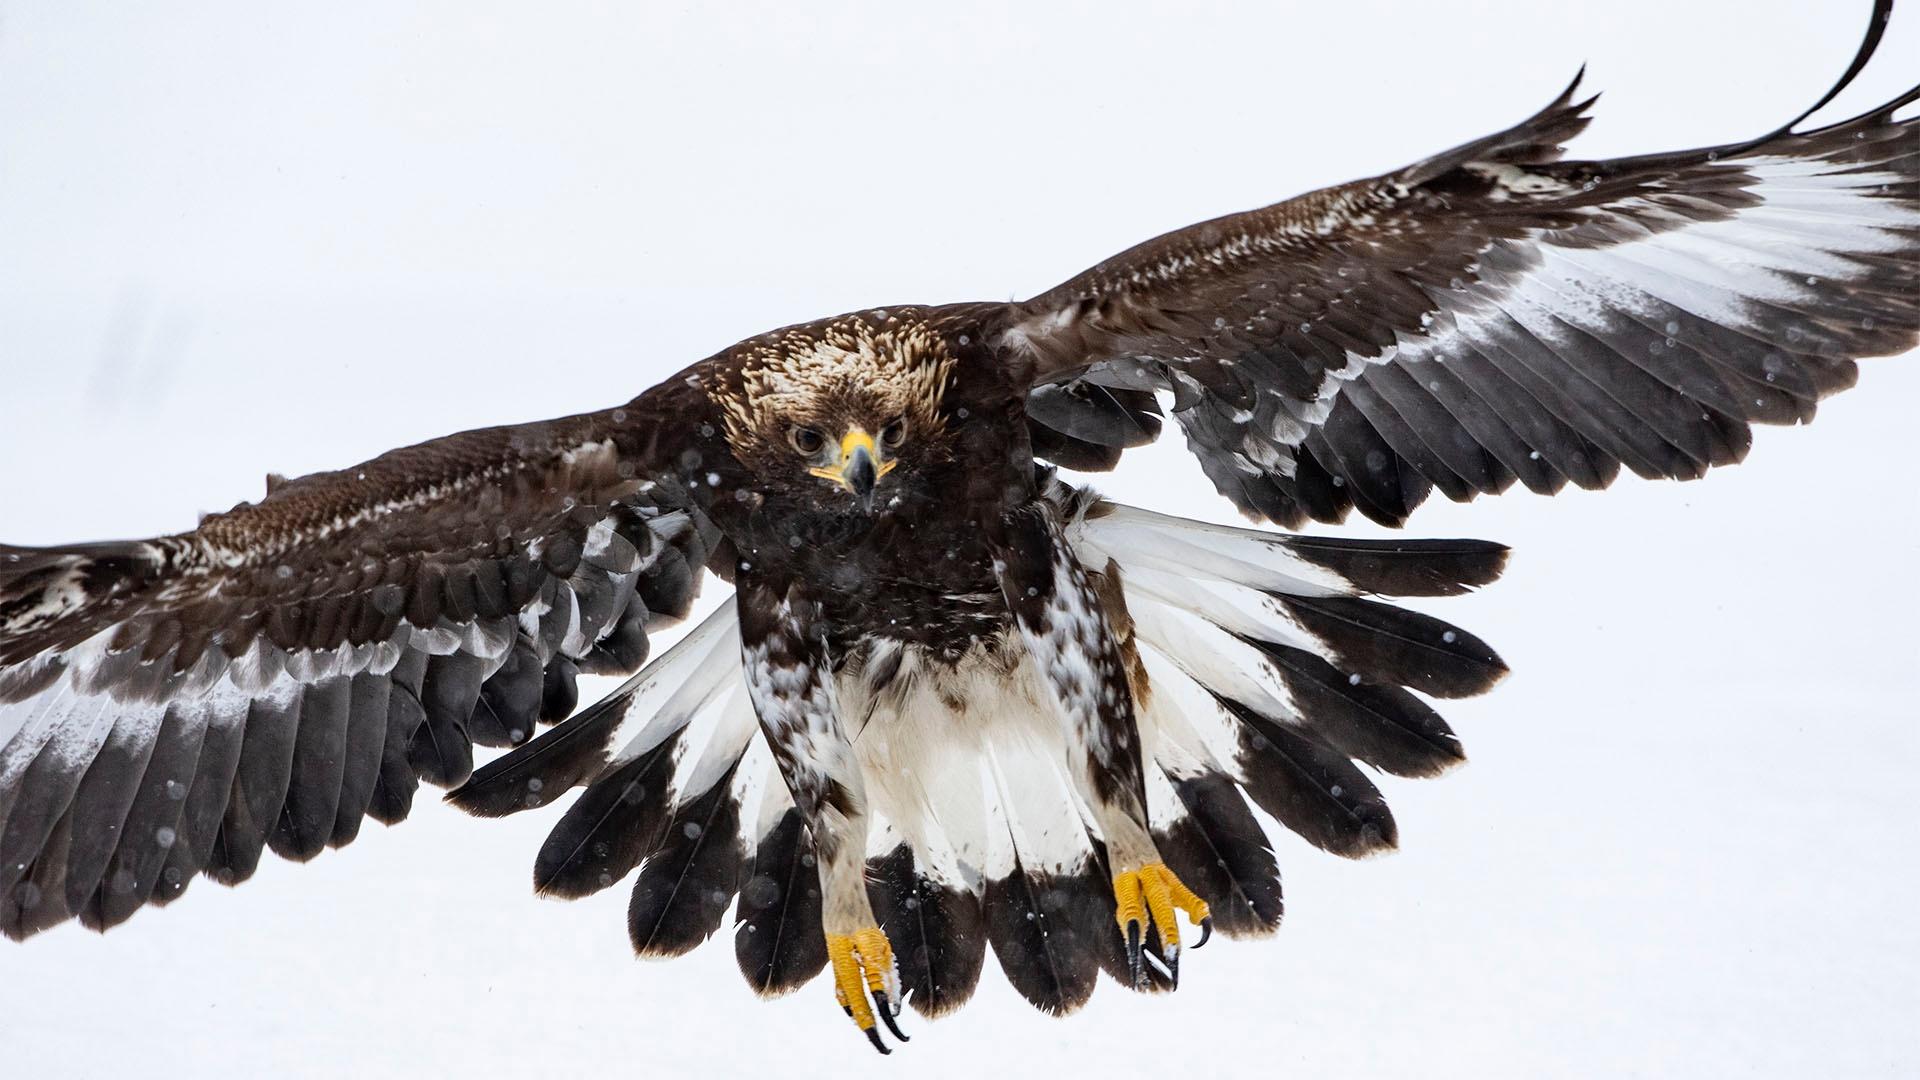 Closeup image of a golden eagle in flight.